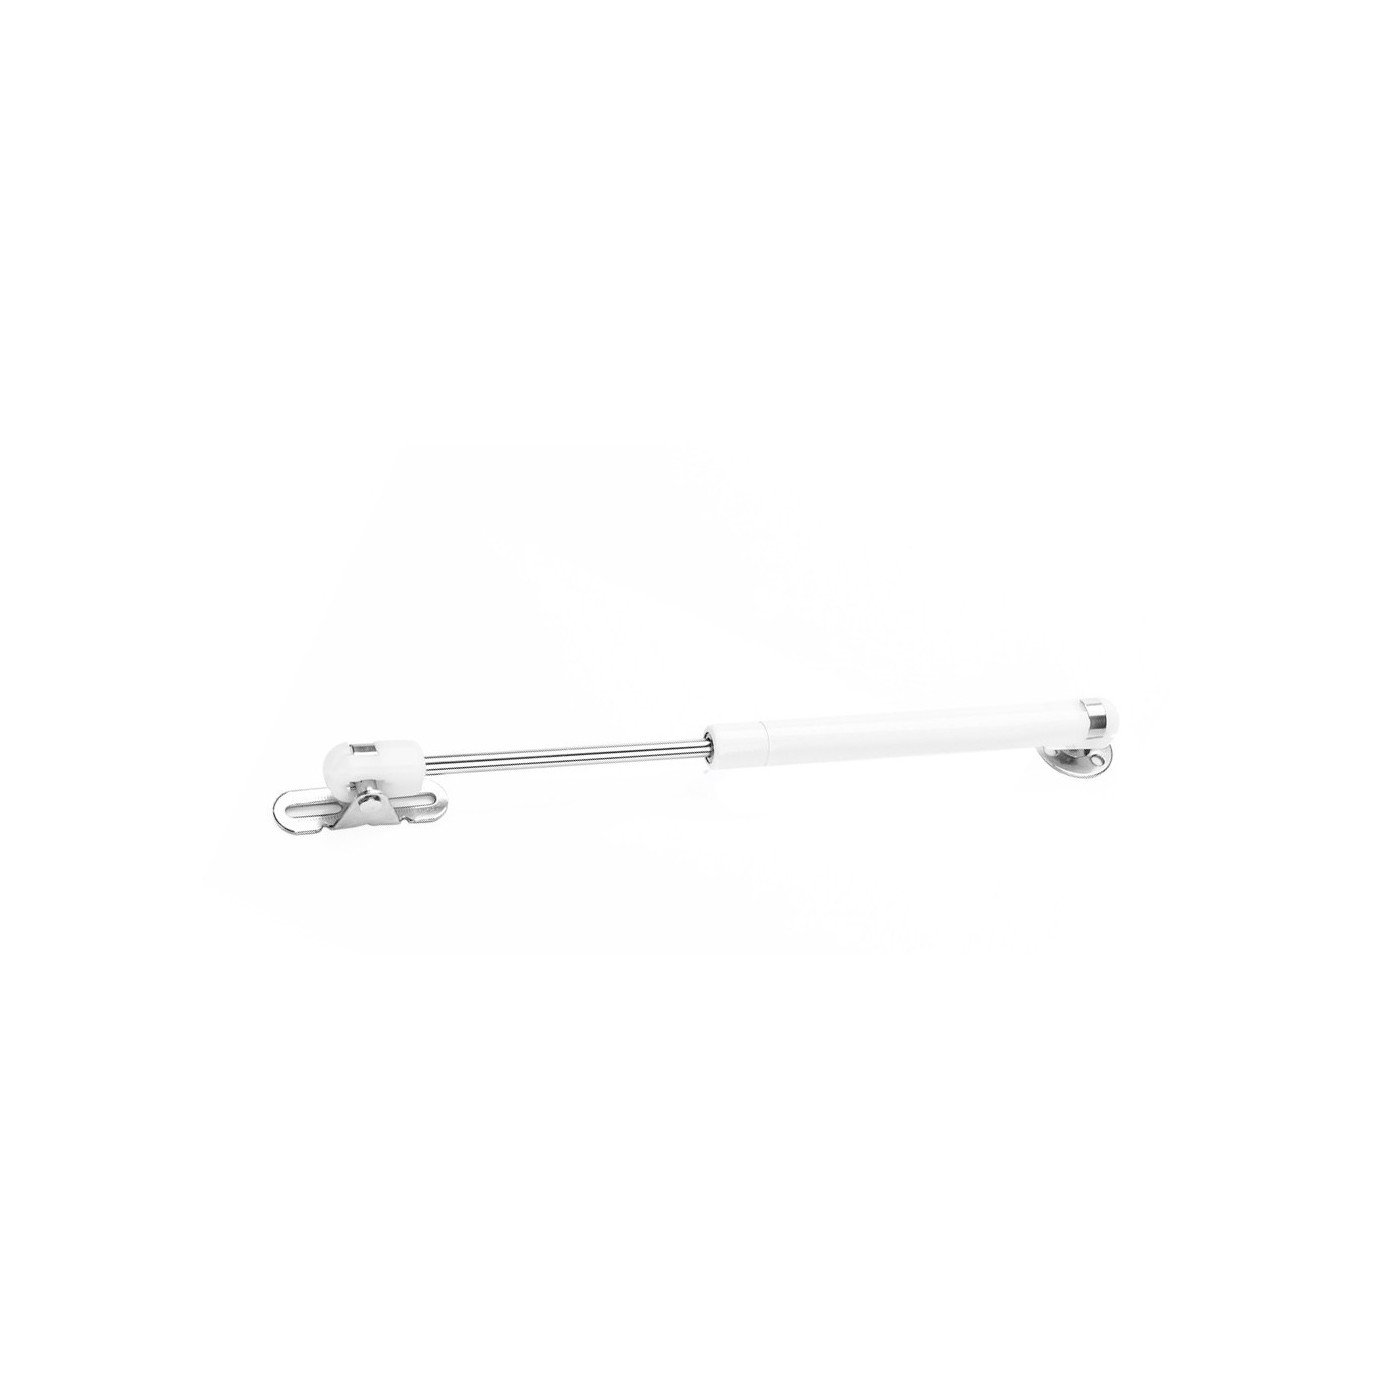 Universal gas spring with brackets (20N/2kg, 244 mm, white)